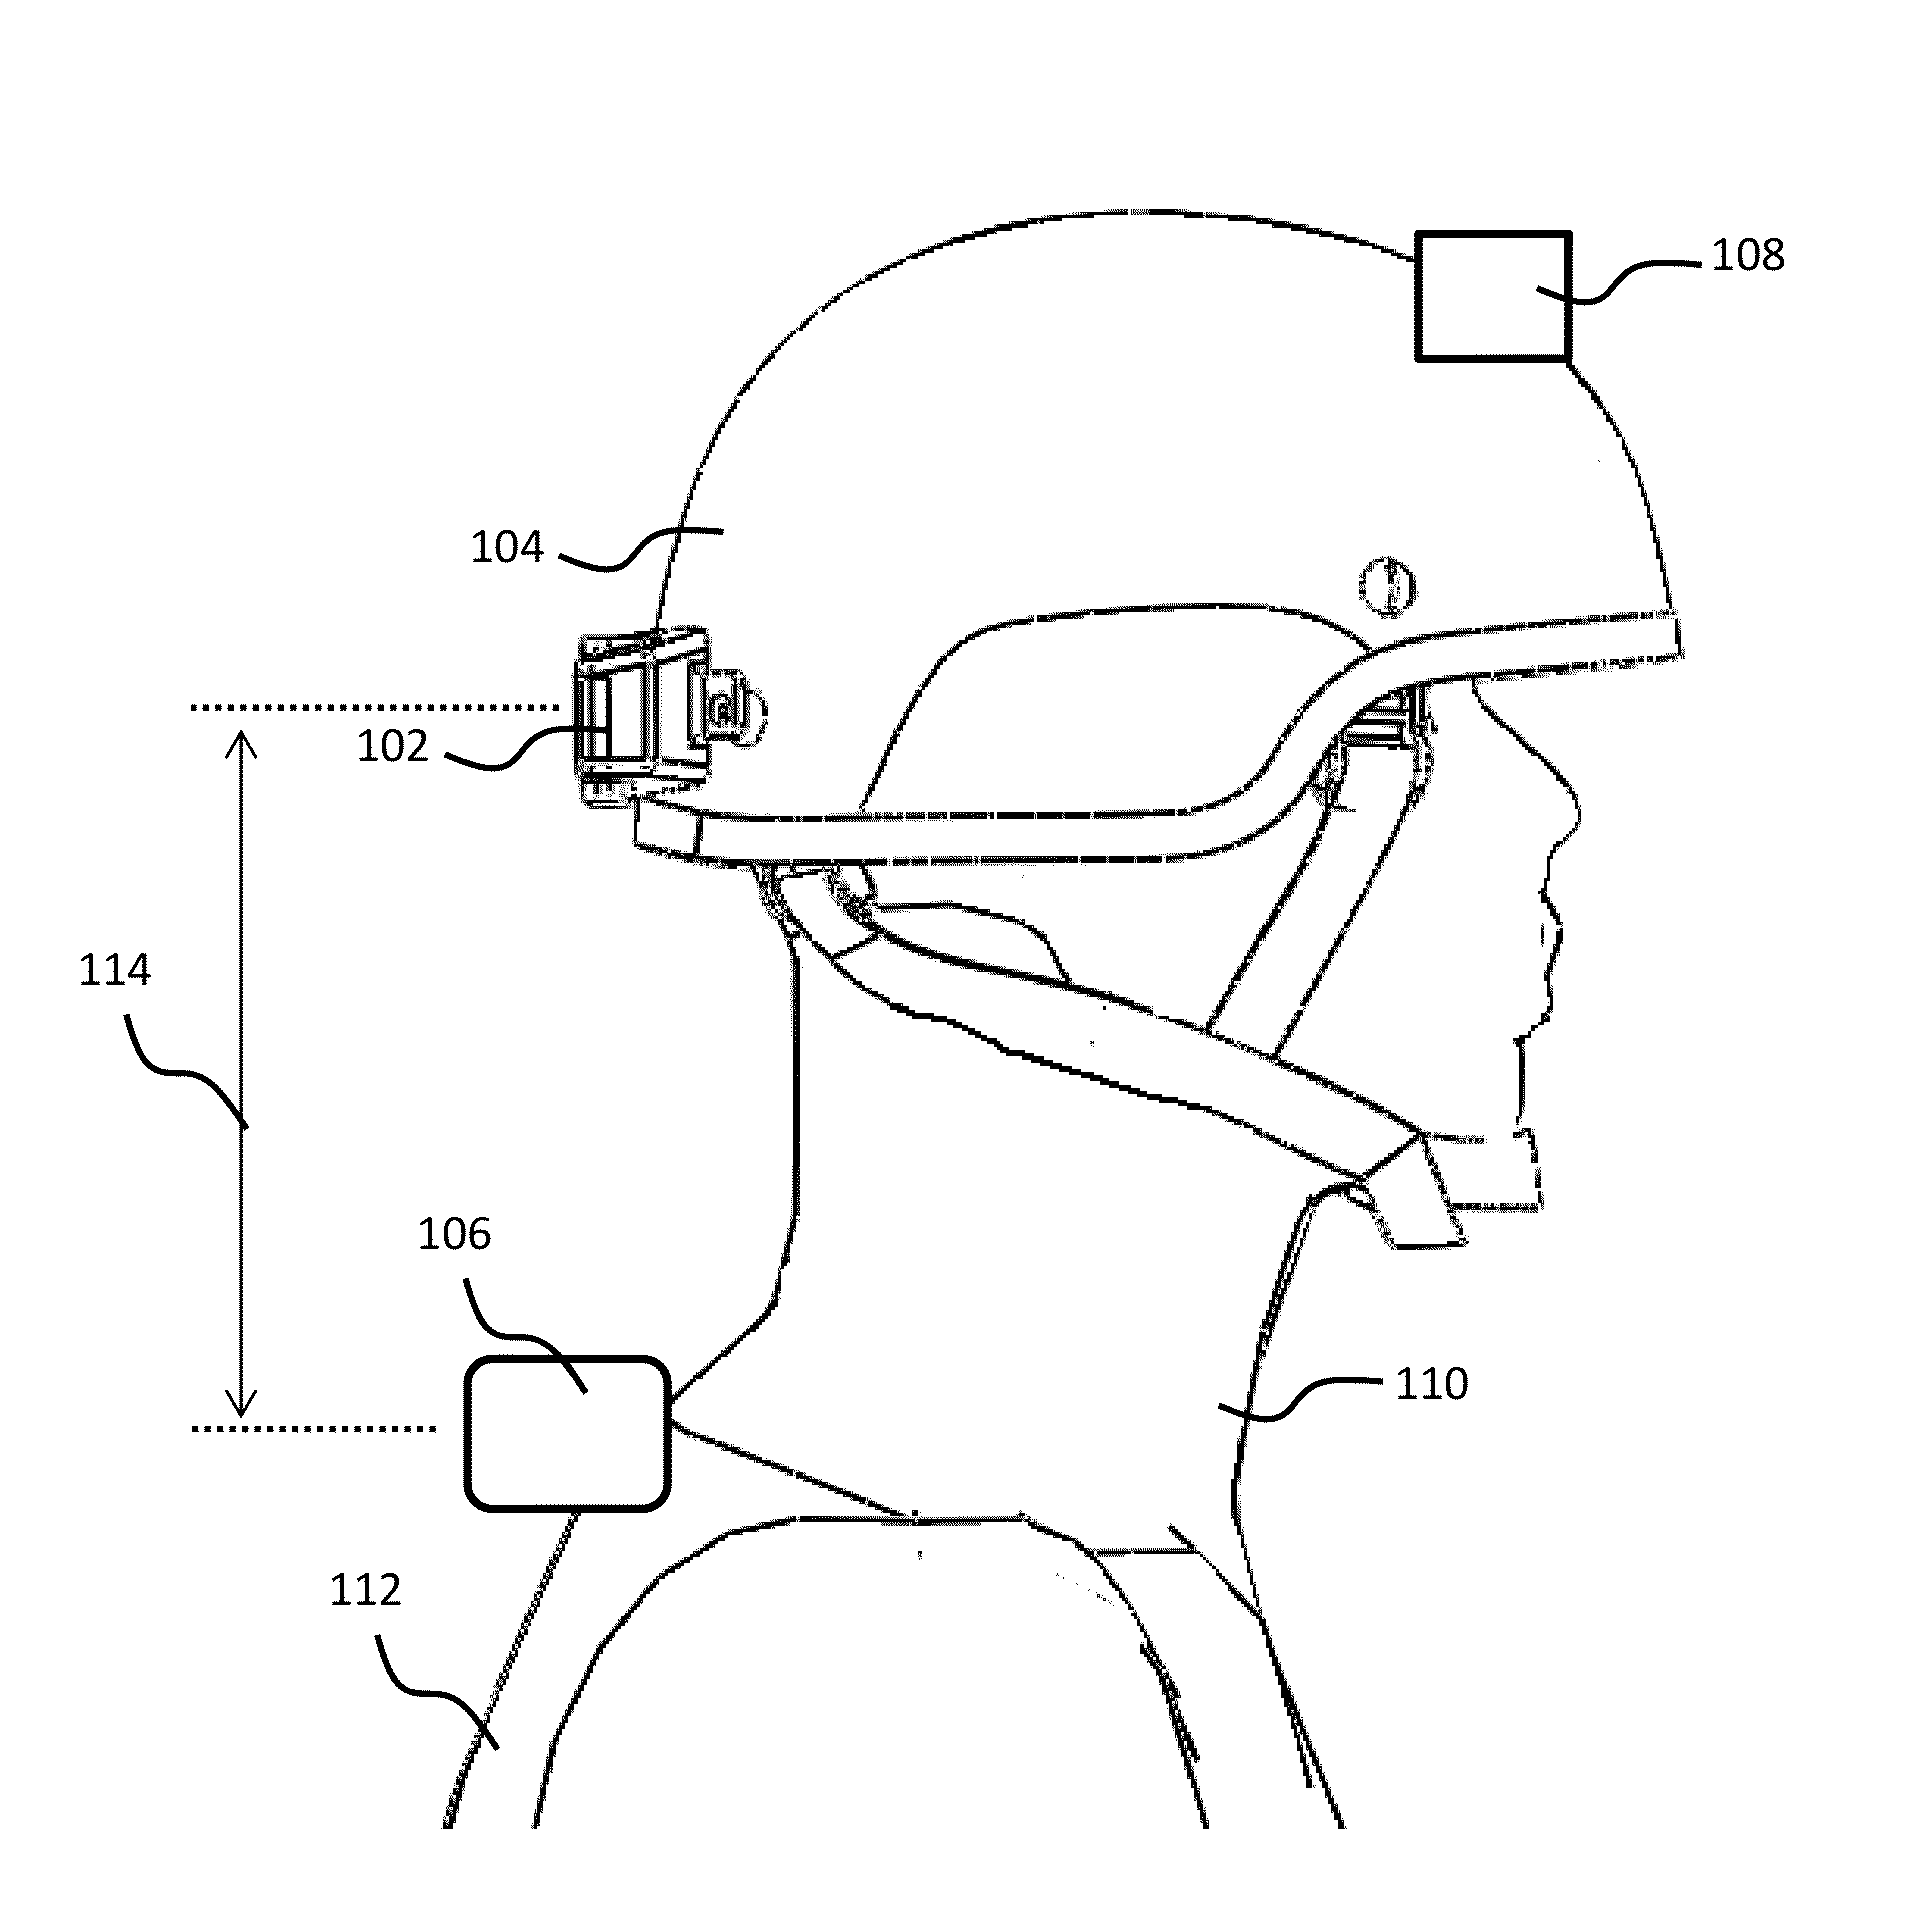 Wireless energy transfer for person worn peripherals